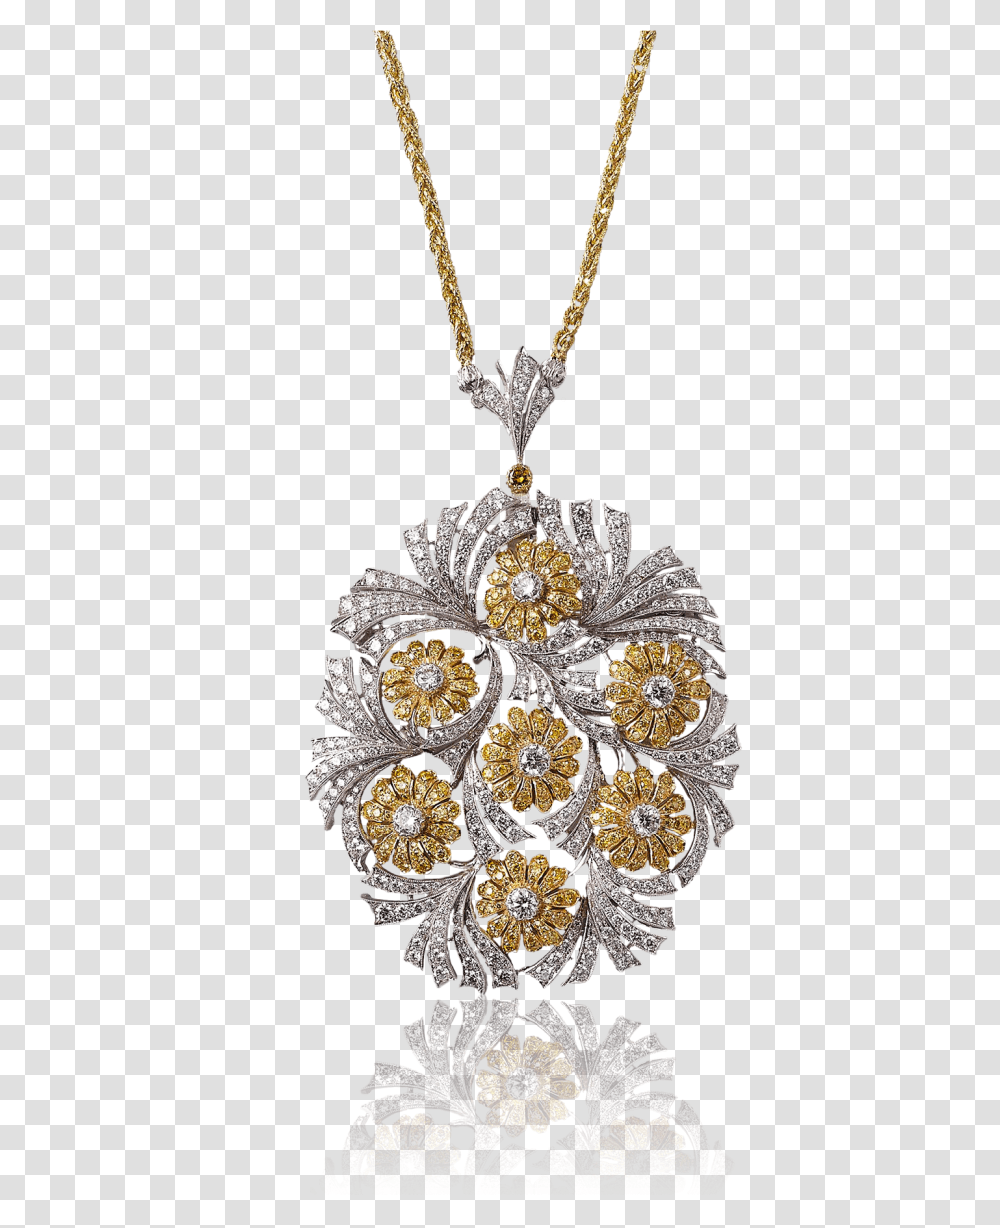 Two Vases Of Flowers Jewellery, Pendant, Accessories, Accessory, Jewelry Transparent Png